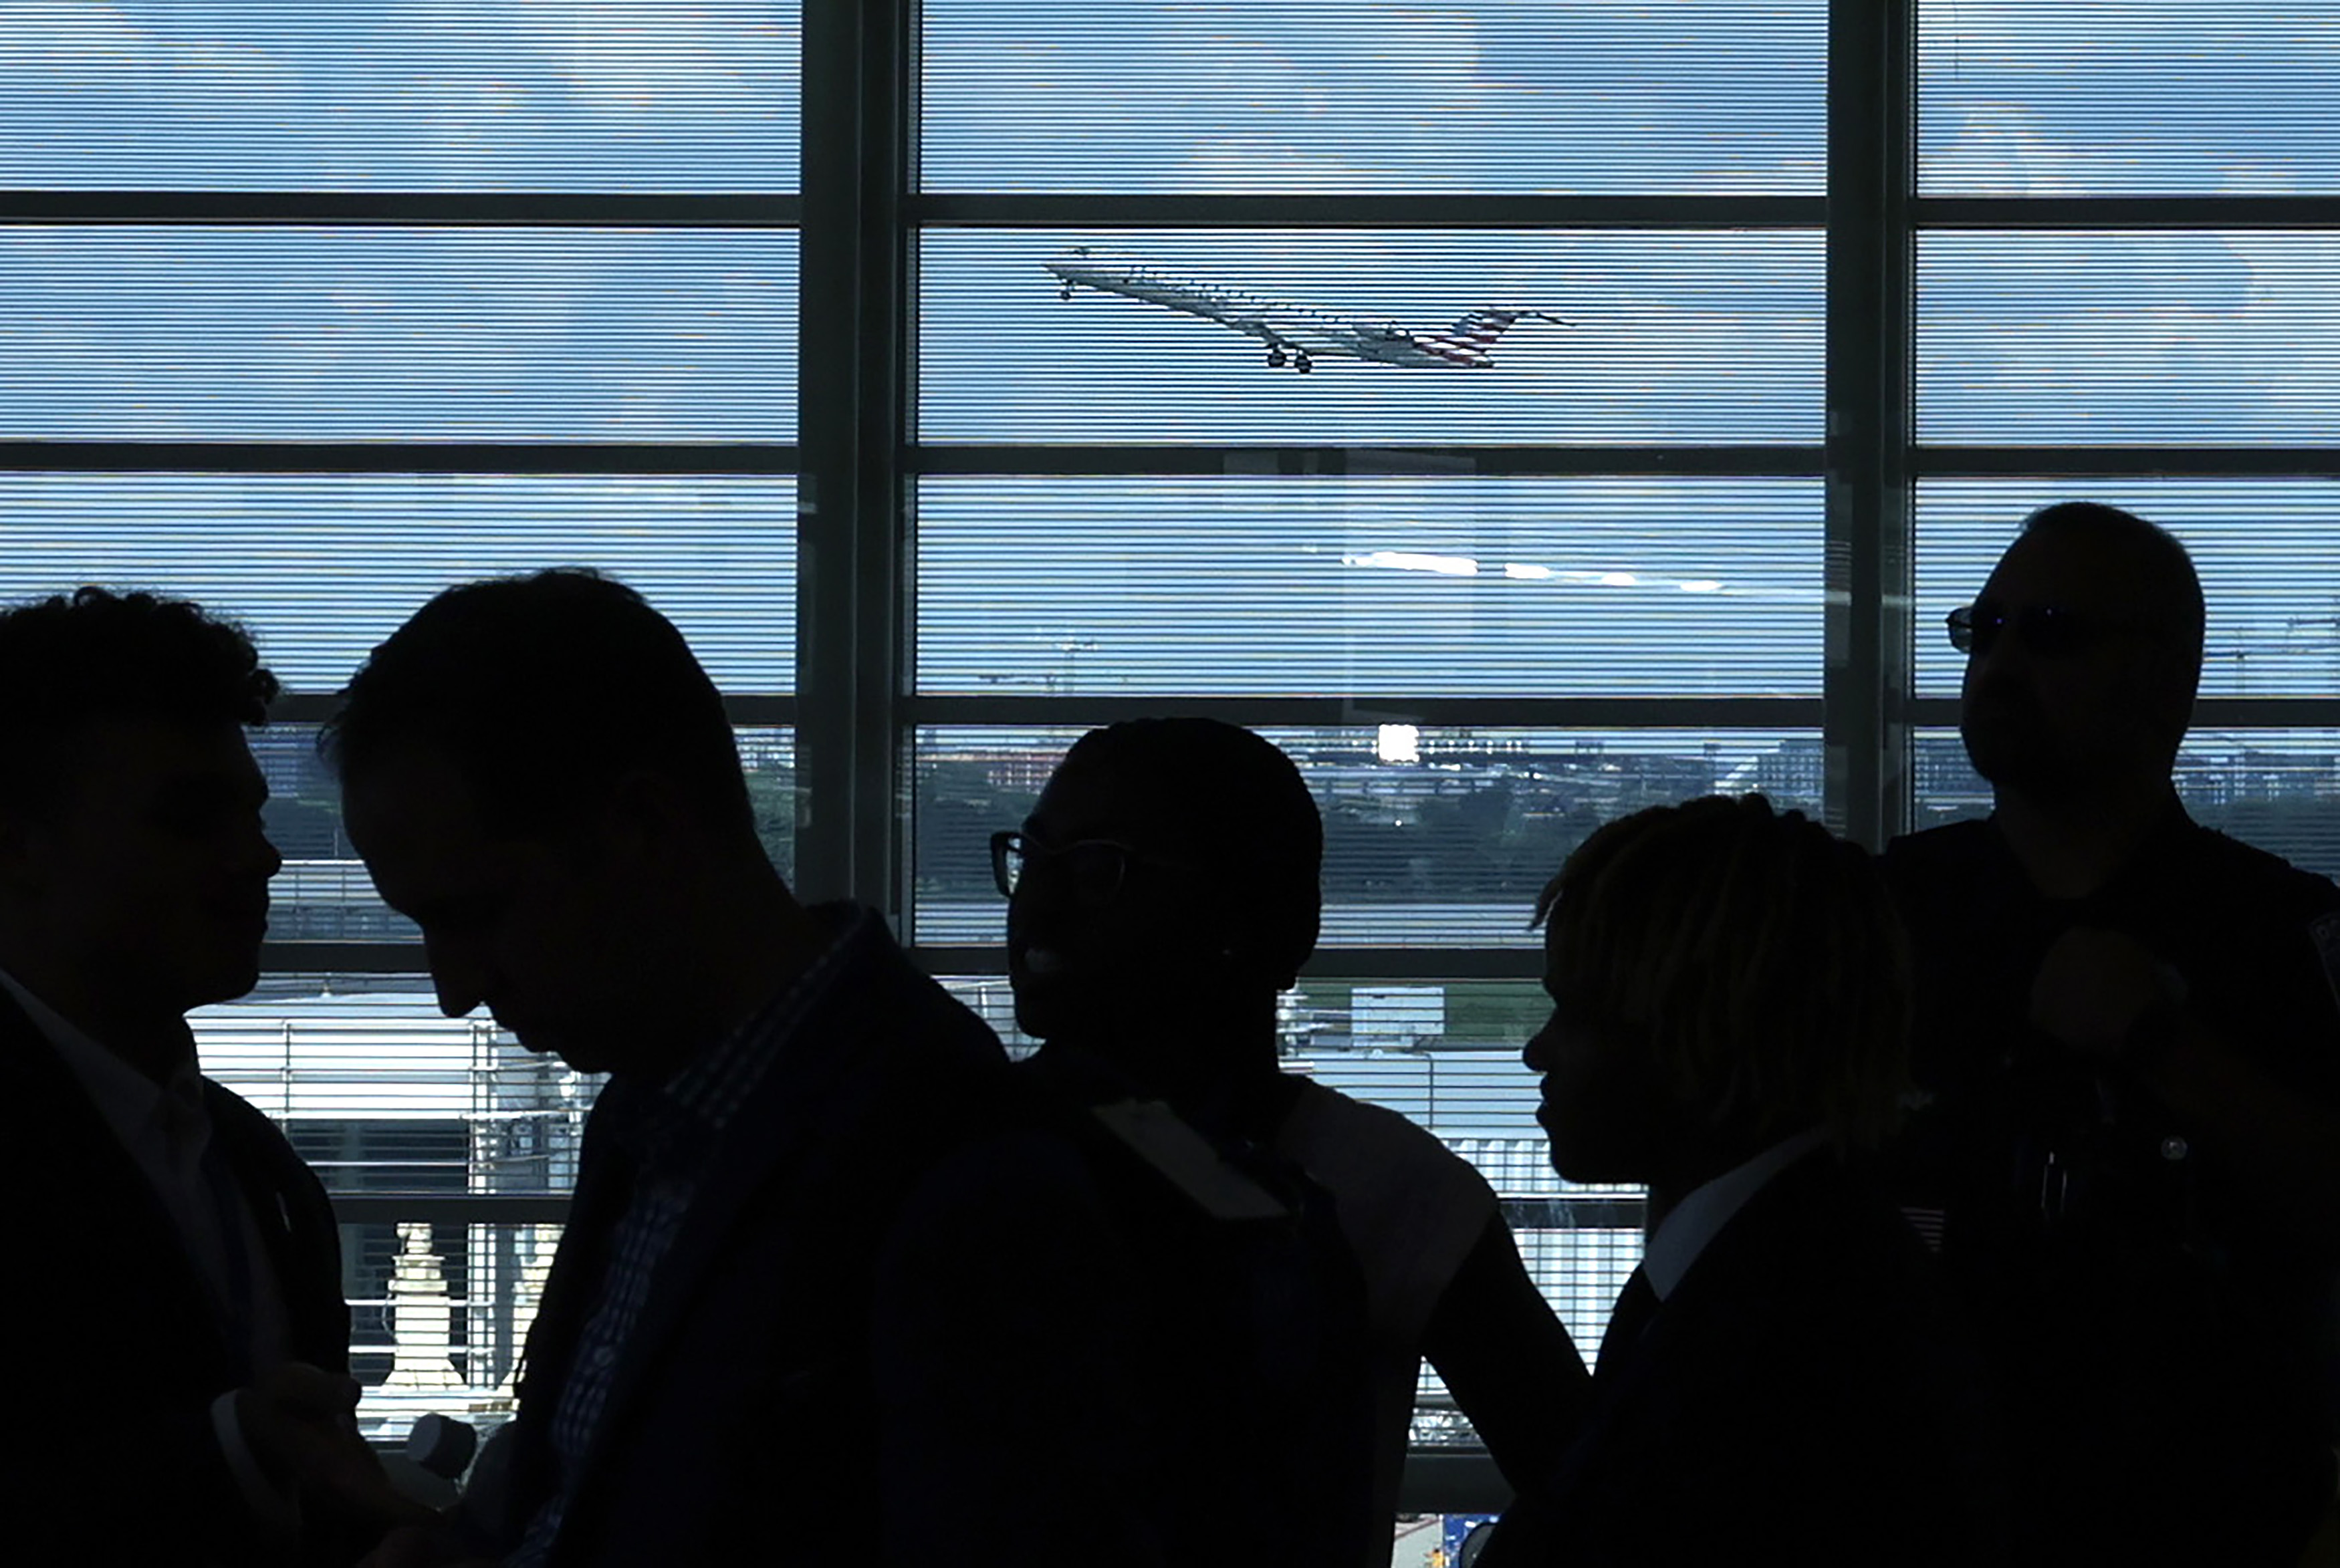 The airline is yet to announce which flights are impacted